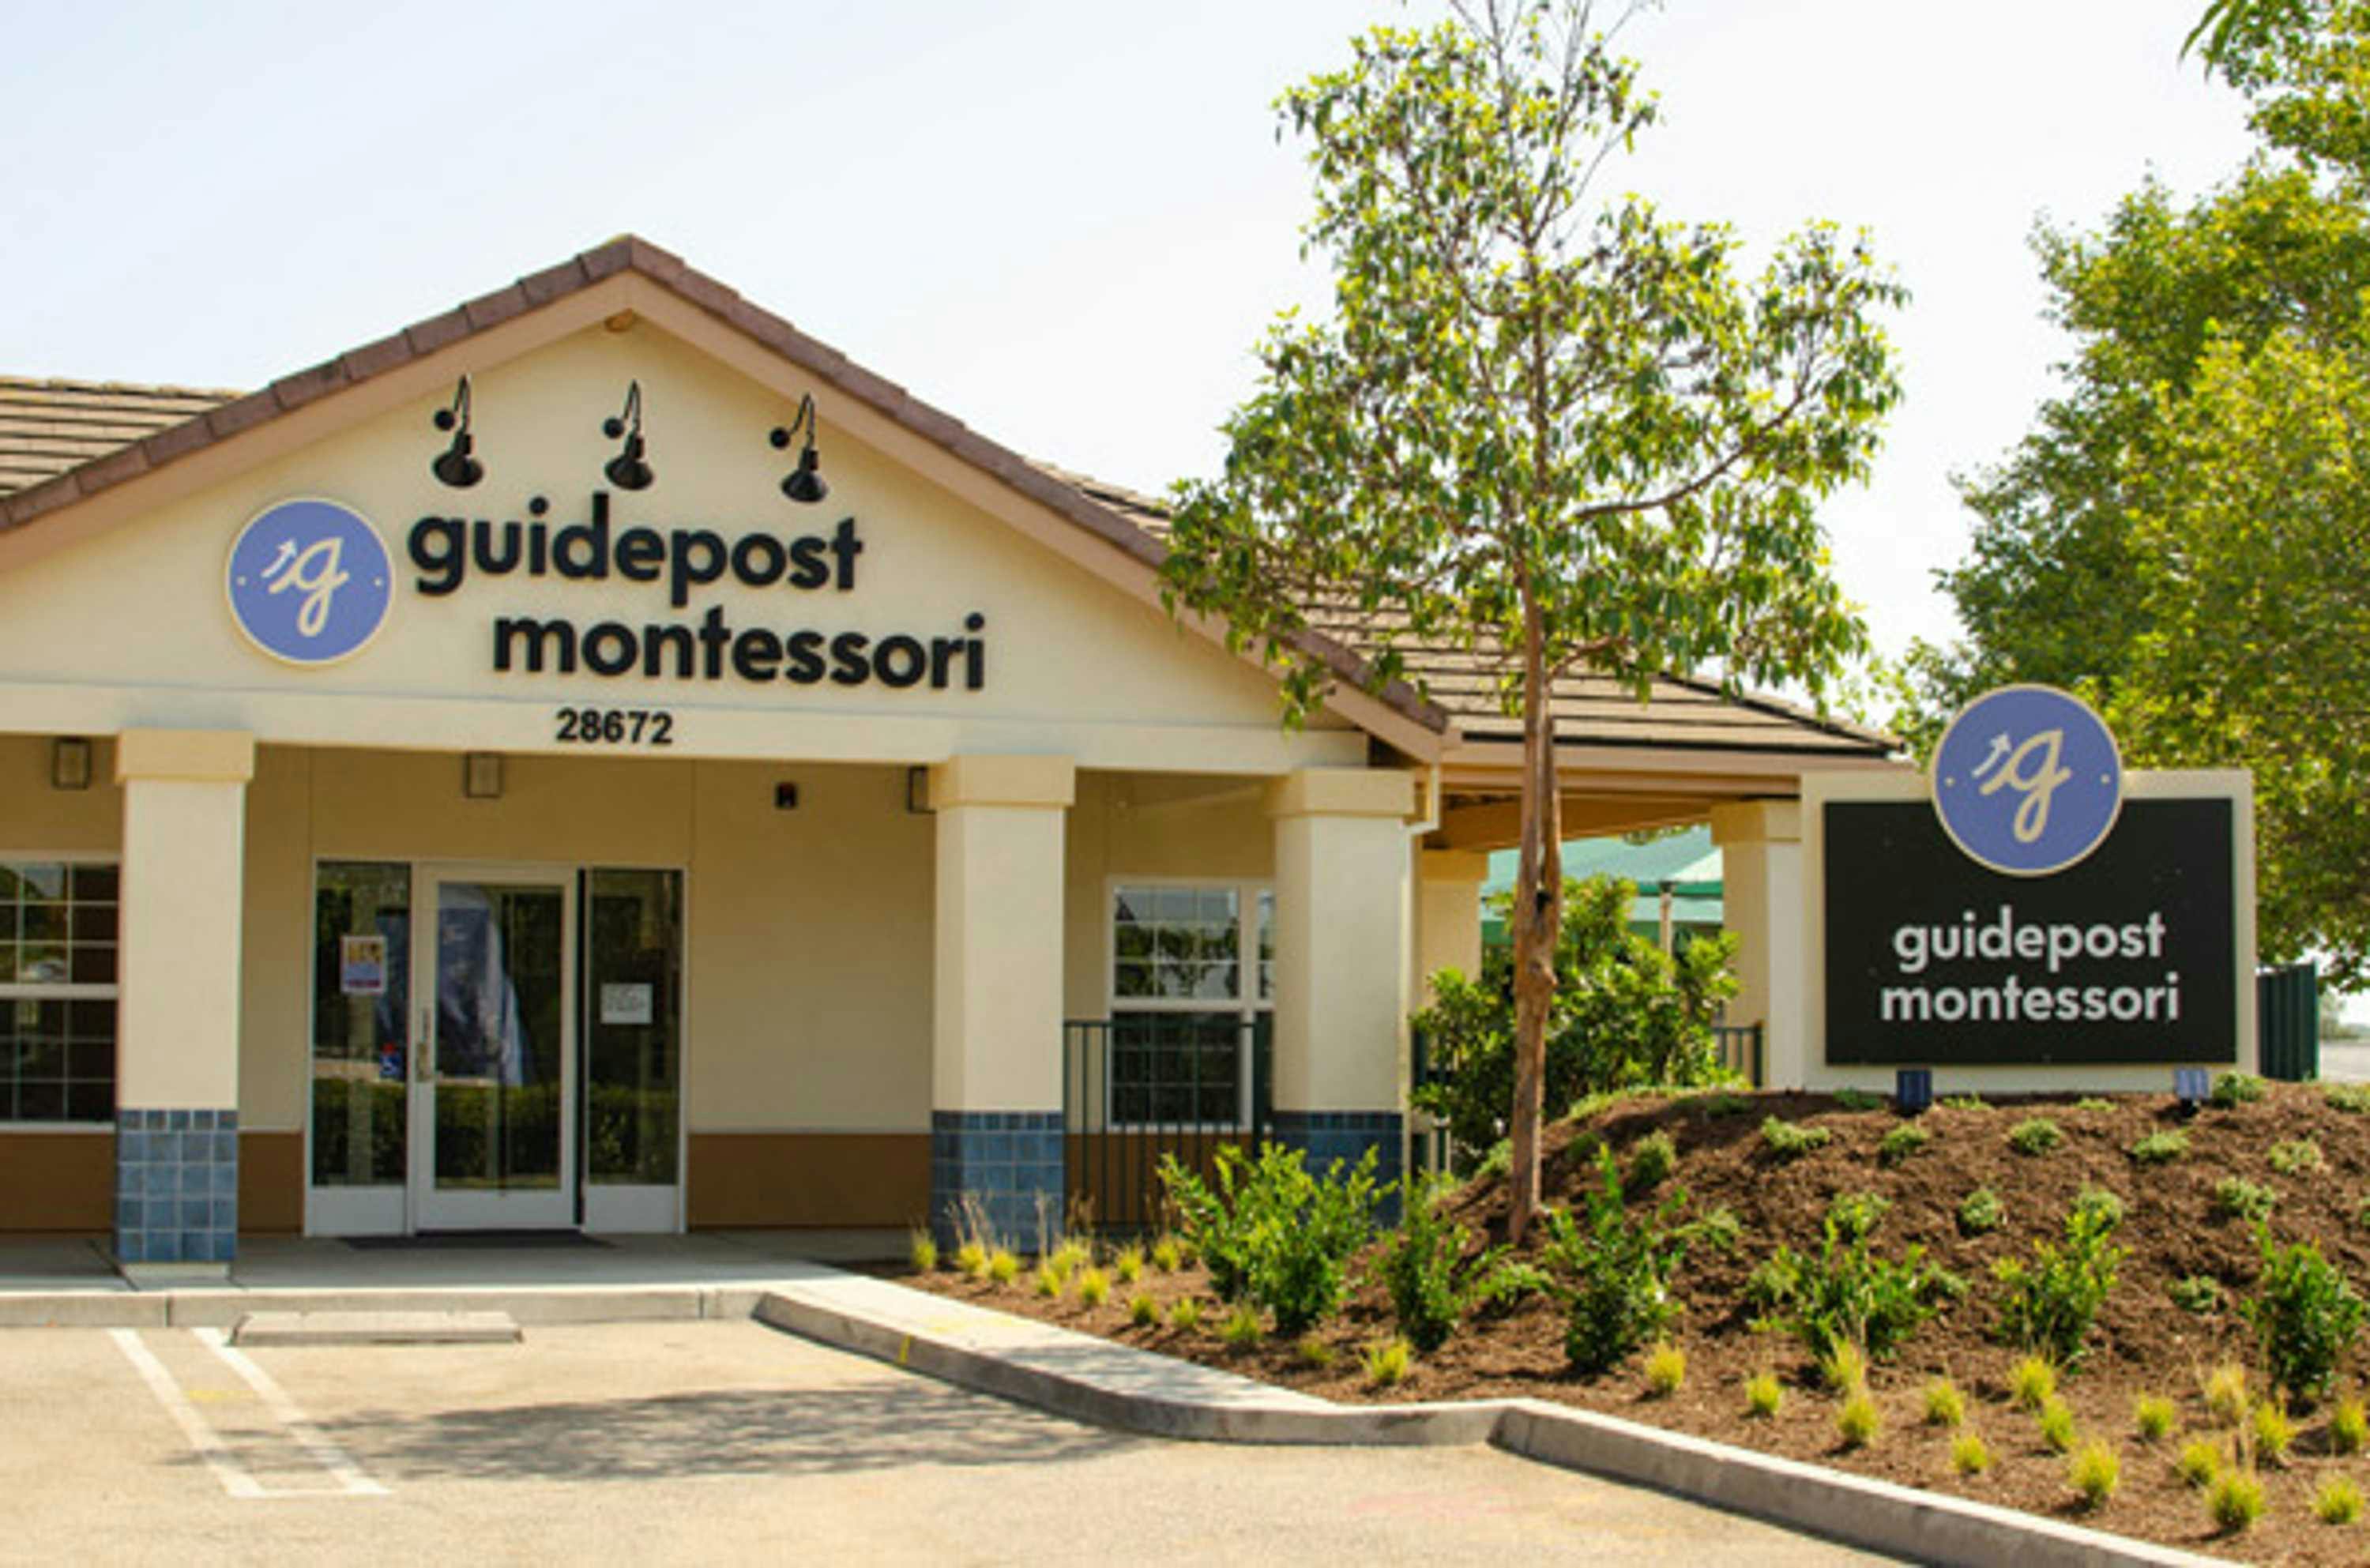 View of Guidepost Montessori at Las Flores entrance from the parking lot that shows the pillared entrance and a branded Guidepost Montessori sign above the door next to a small planter with another branded Guidepost sign.